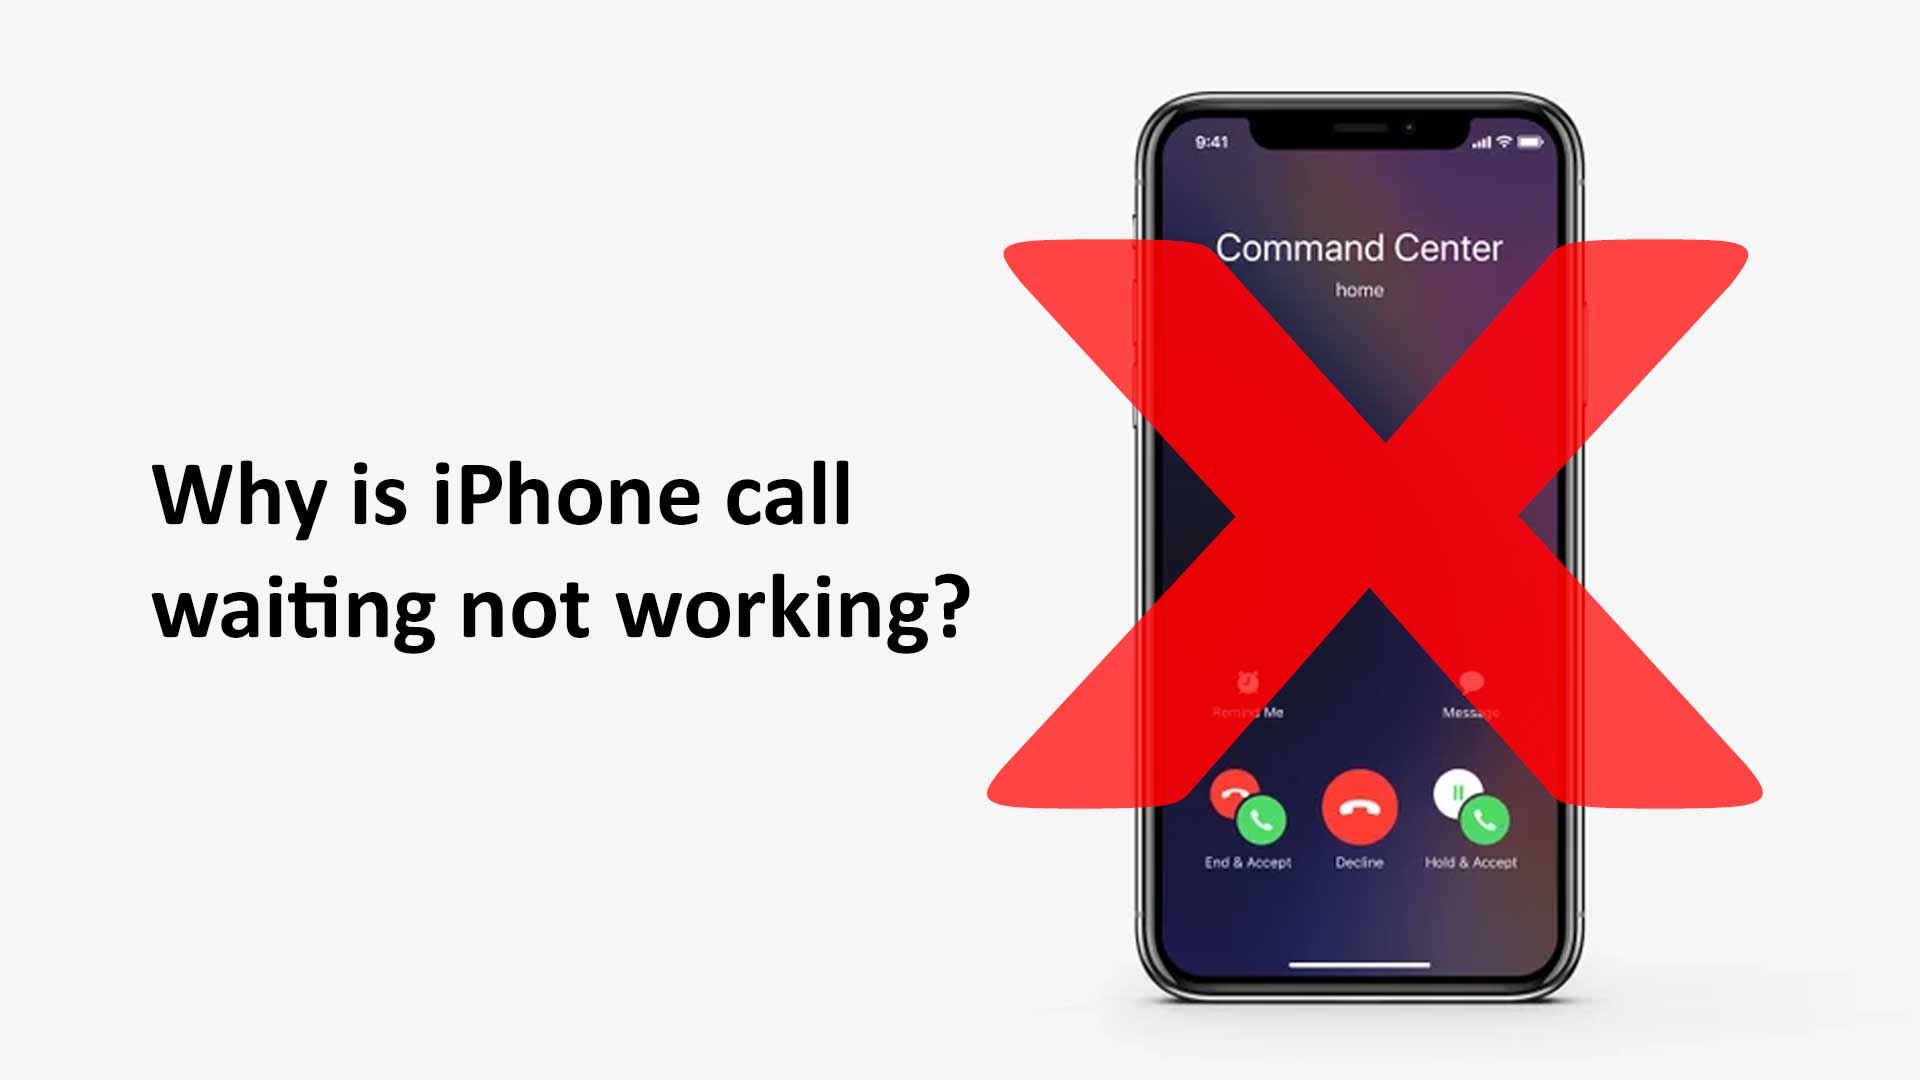 Why is iPhone call waiting not working?